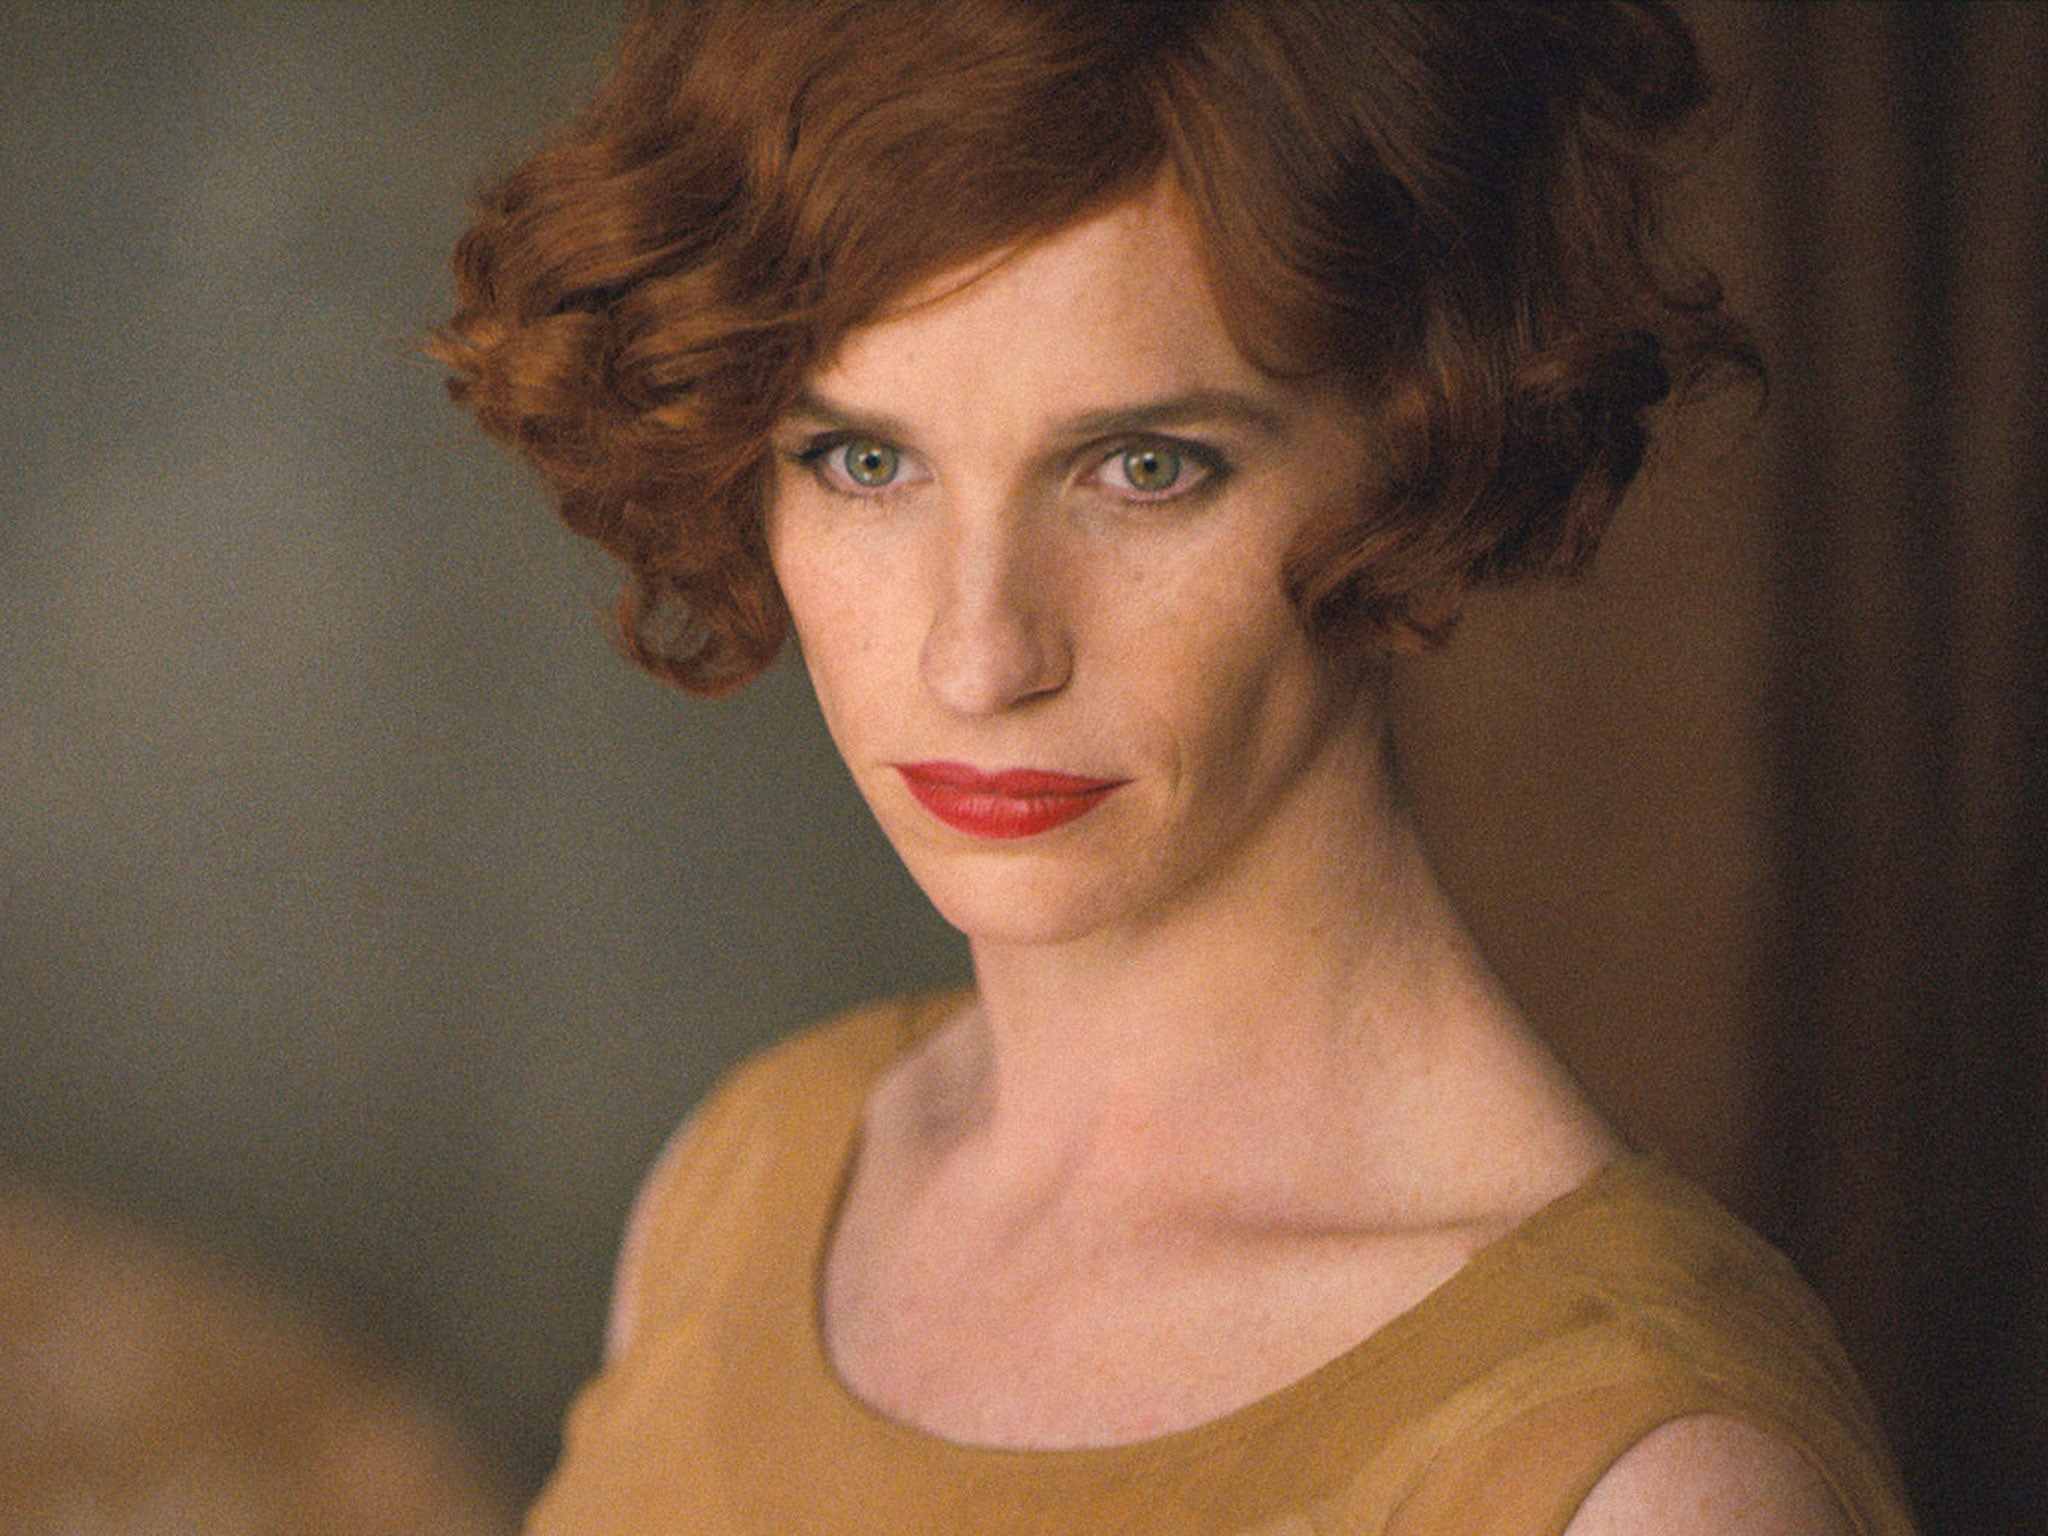 Eddie Redmayne in The Danish Girl: Just because you can mimic a beloved transgender pioneer doesn't mean you should be a shoo-in for the top award (Rex)